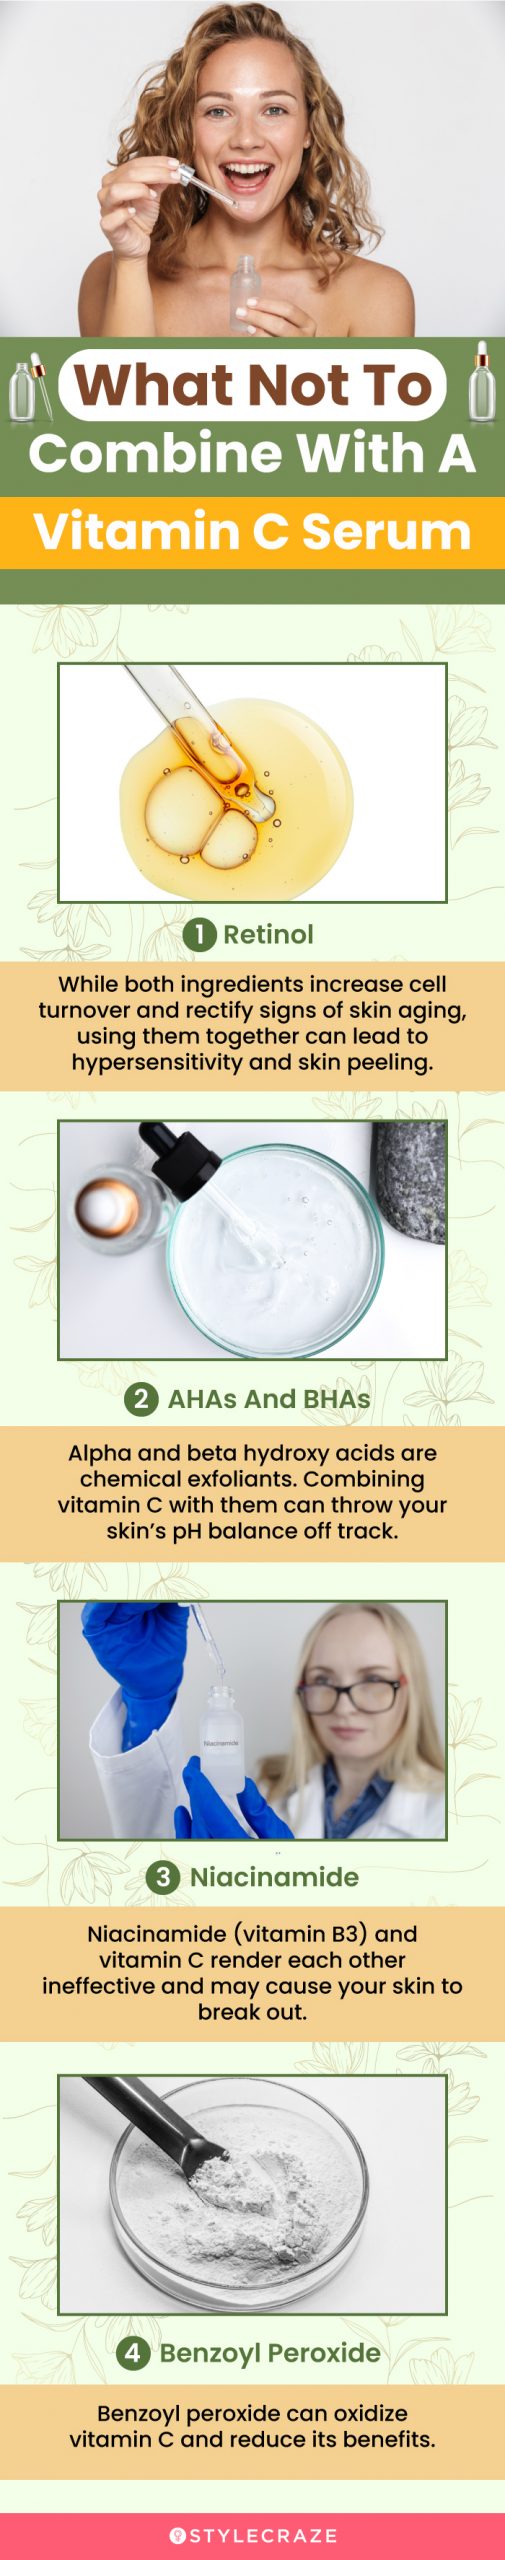 What Not To Combine With A Vitamin C Serum (infographic)